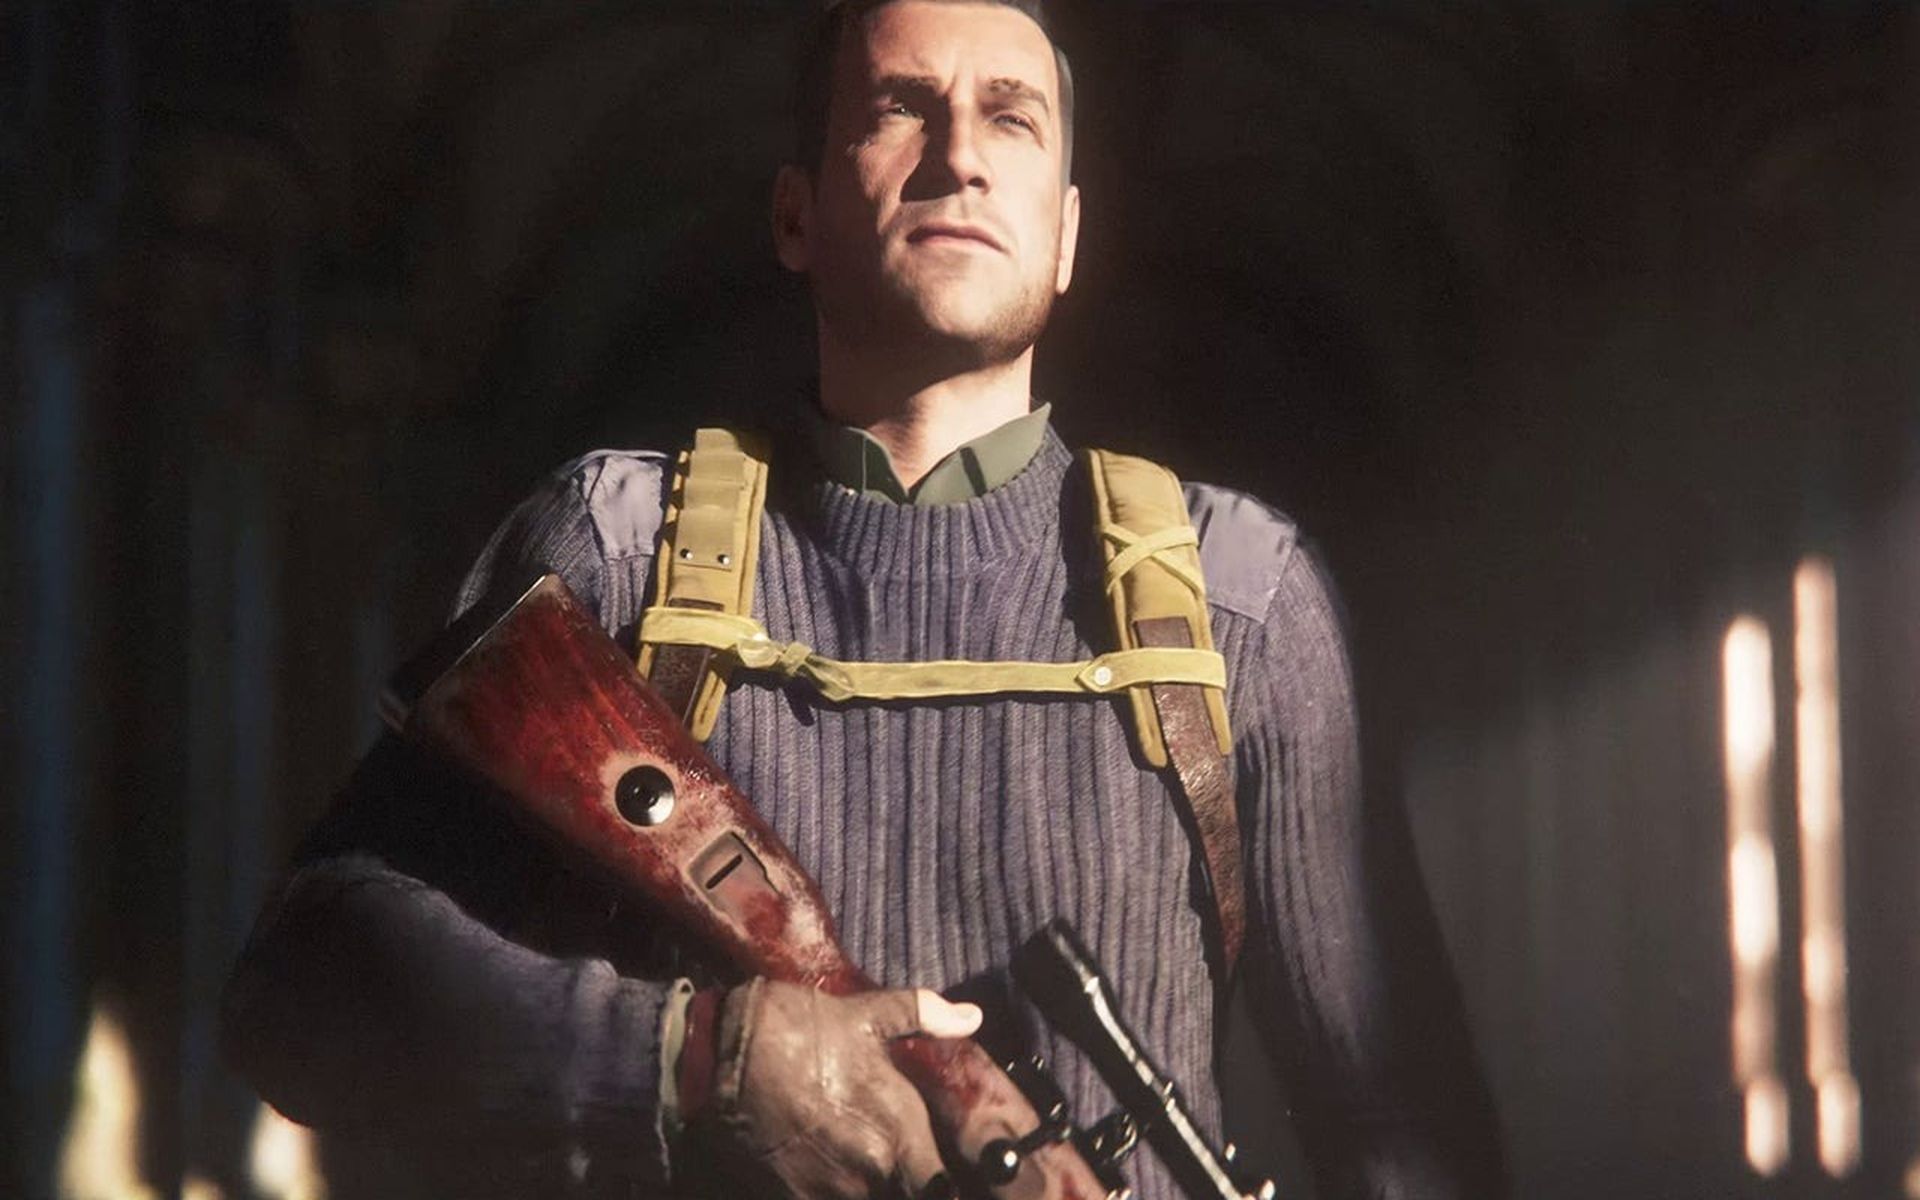 Are you ready for Sniper Elite 5 Game Pass? The game will be available on May 25th. Learn how to fix Windows cannot access the specified device.